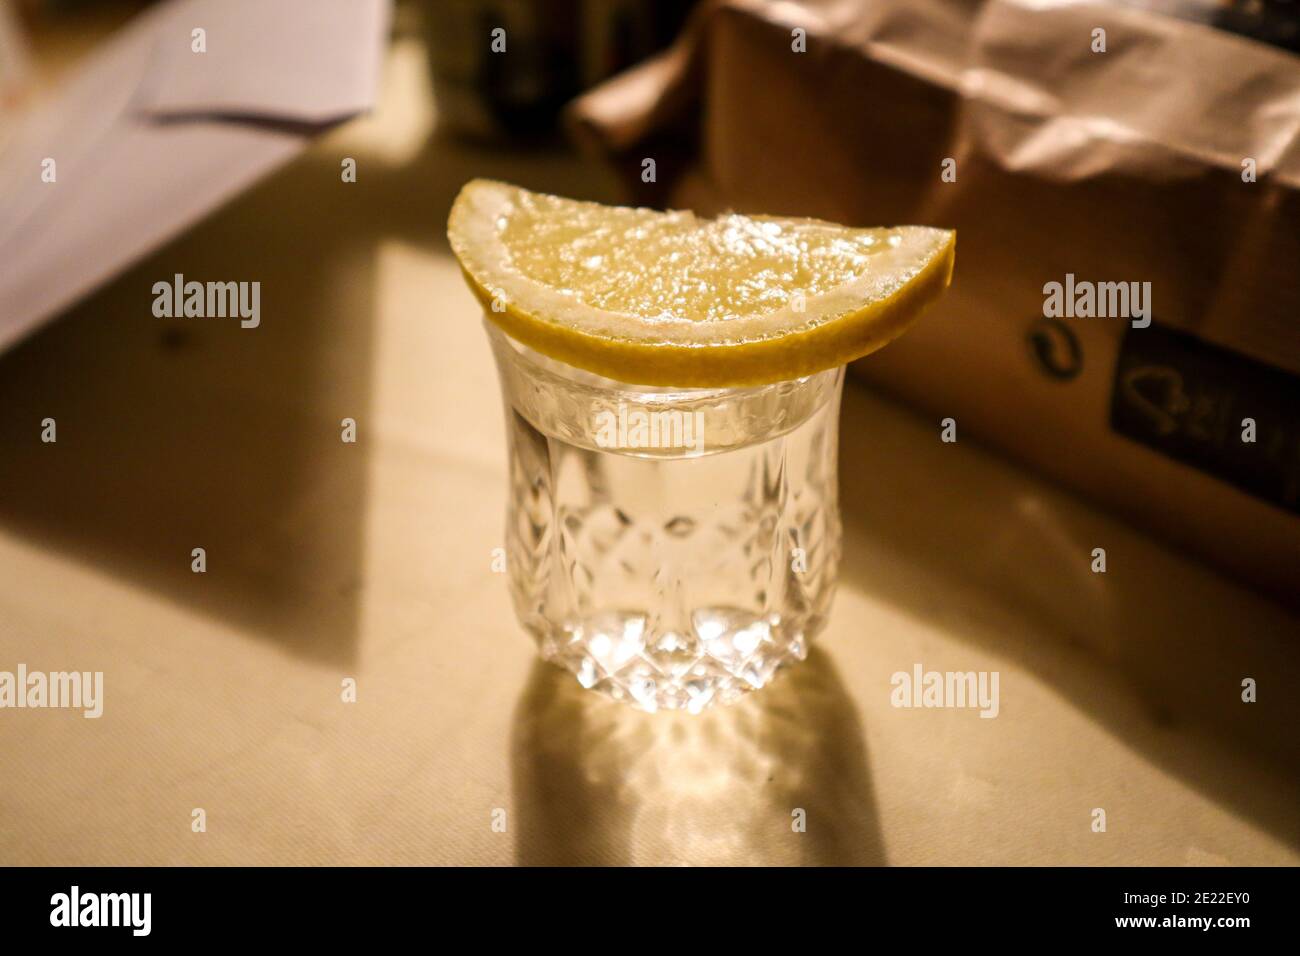 Tequila shot glass with freshly sliced lemon on a table with great lighting which shines through the glass. There are objects in the background. Stock Photo